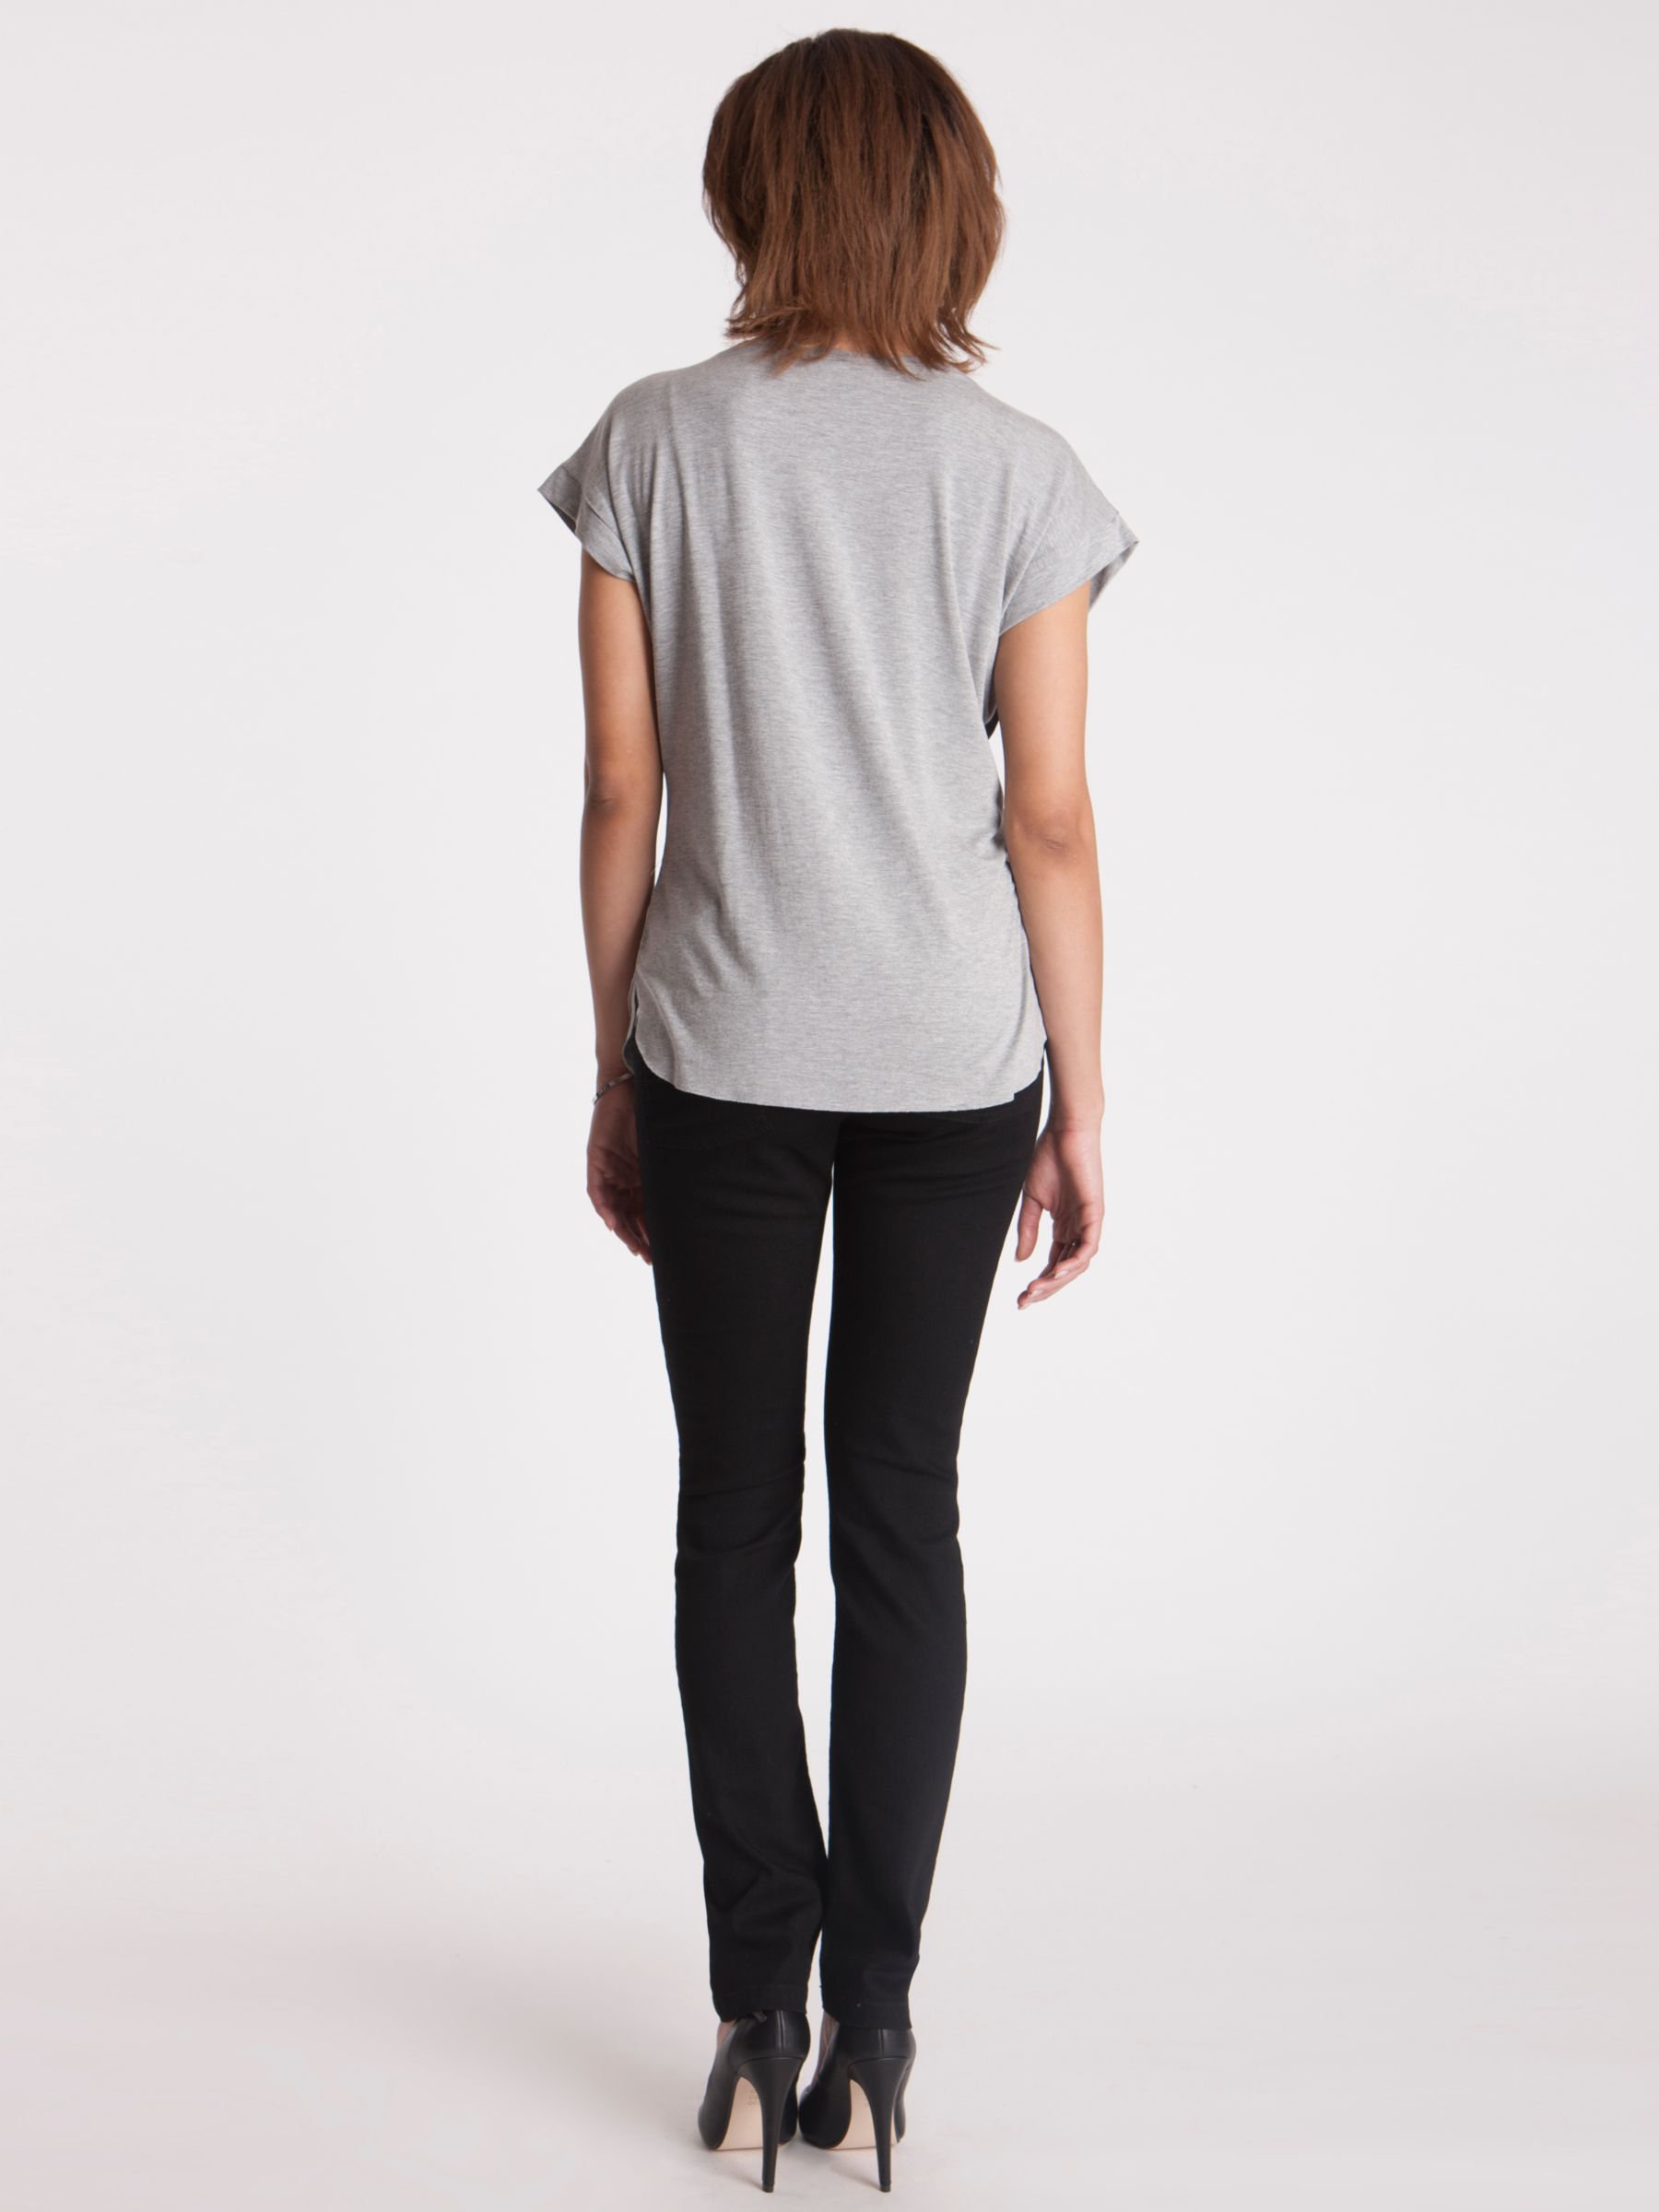 Seraphine Remy Maternity Skinny Jeans Black At John Lewis